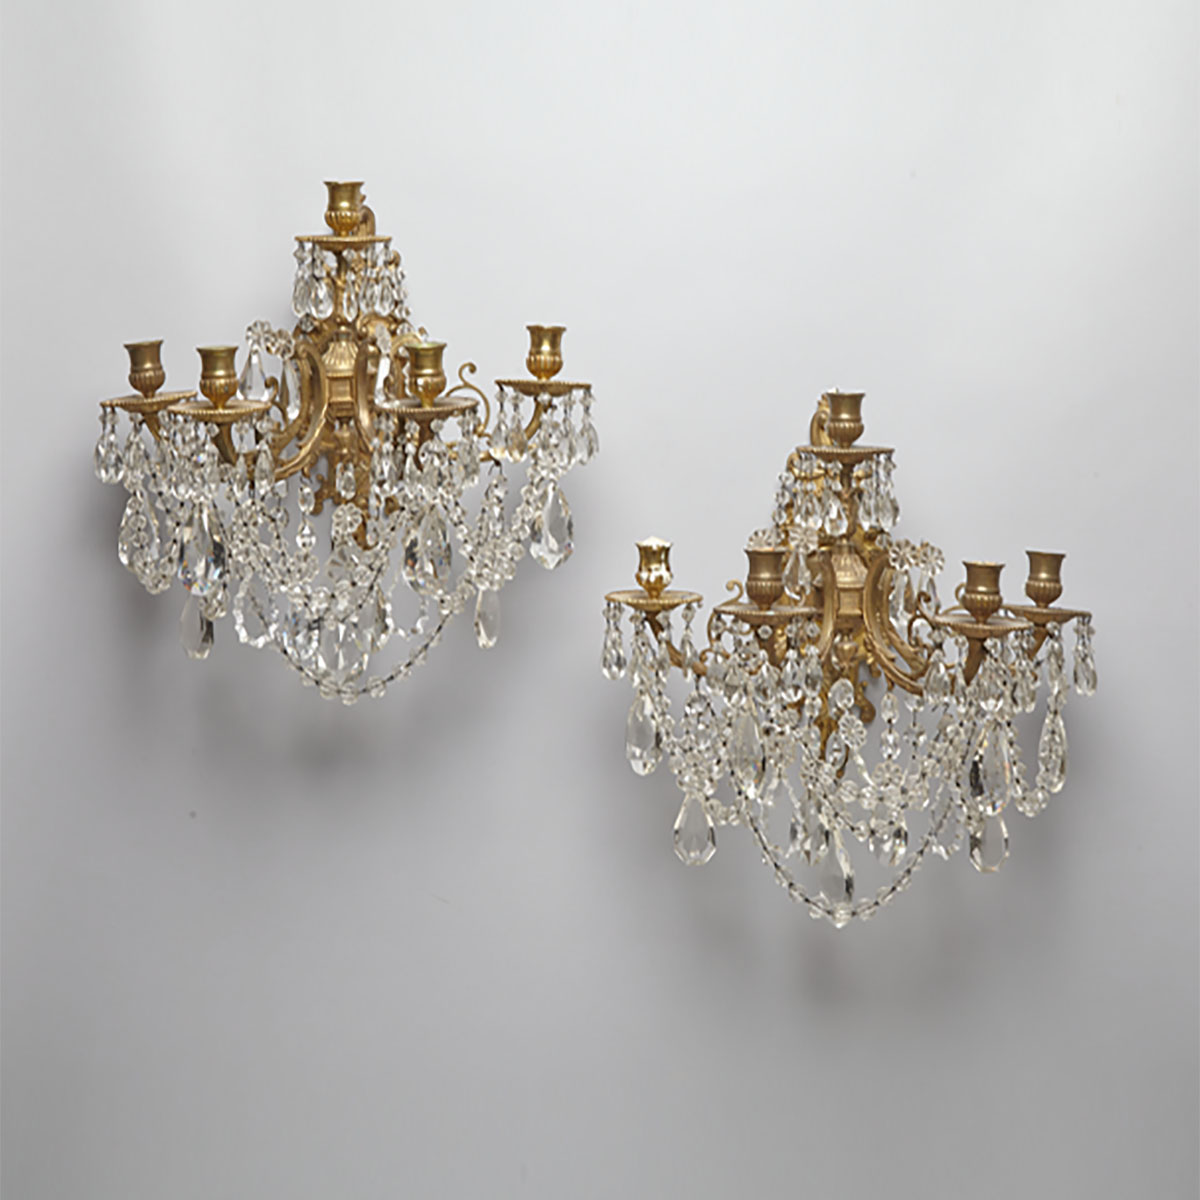 PAIR OF CUT GLASS MOUNTED BRASS FIVE-CANDLE WALL SCONCES, EARLY 20TH CENTURY
